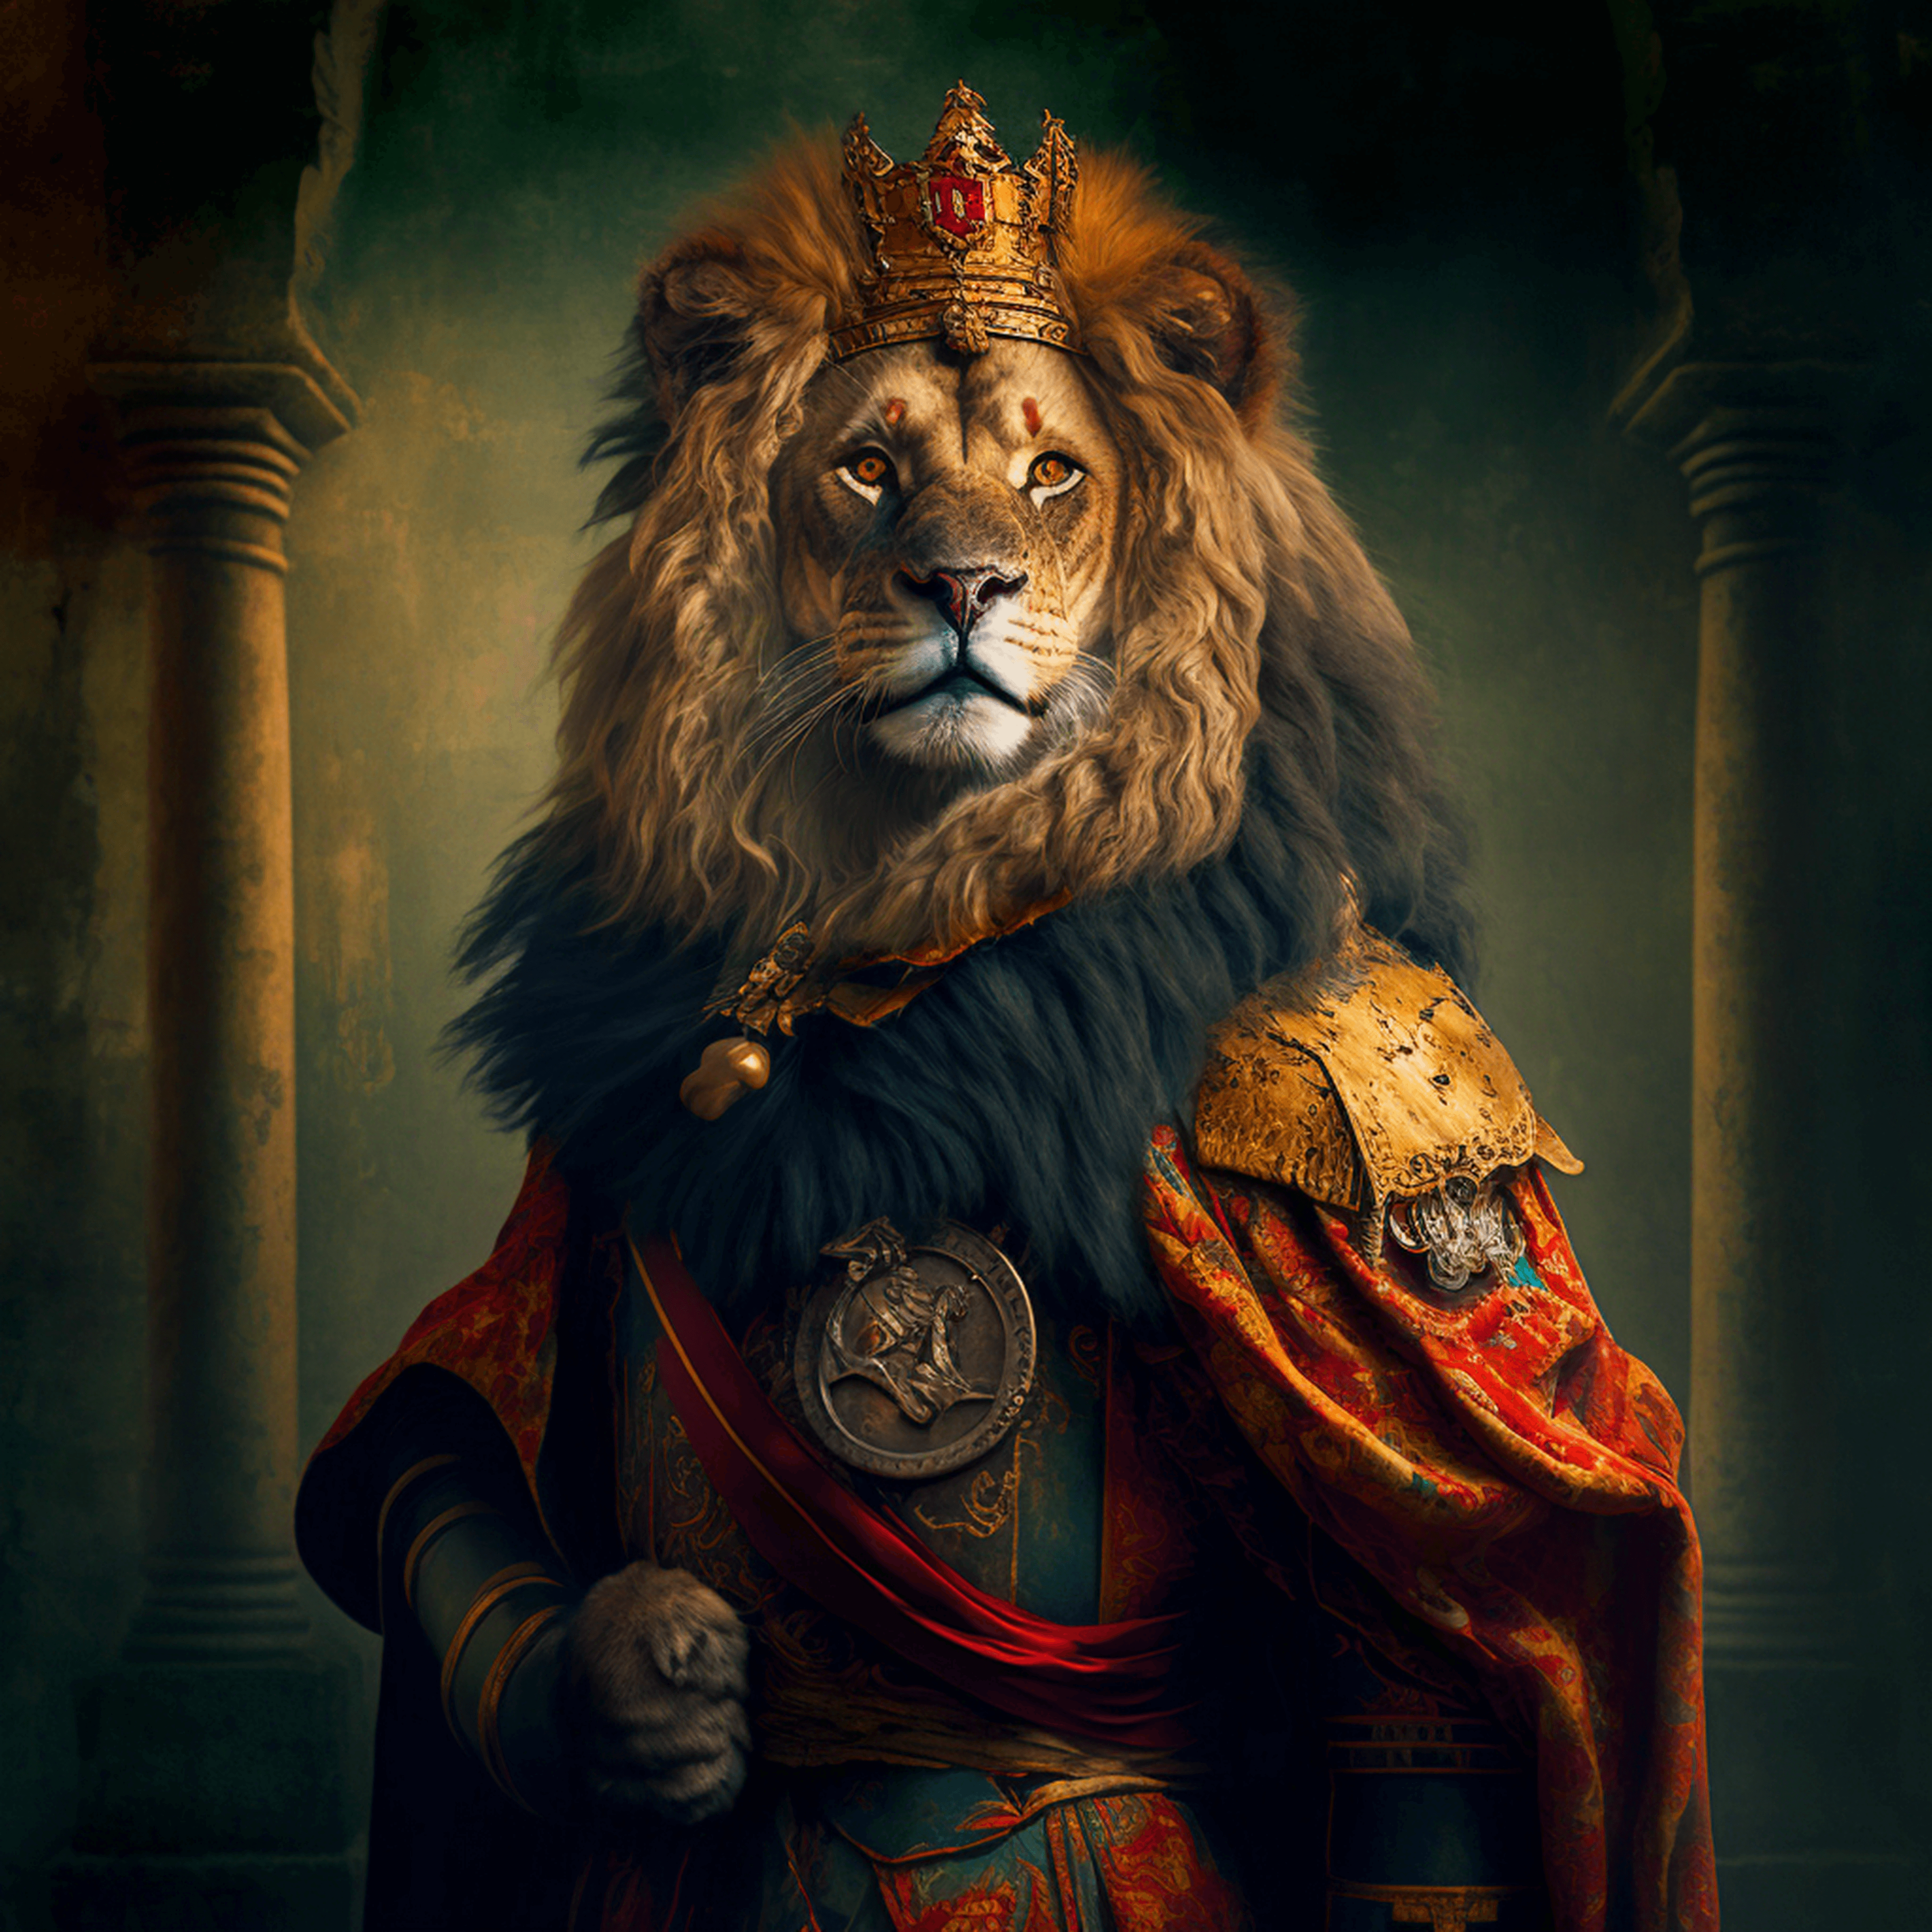 The King Of Lions